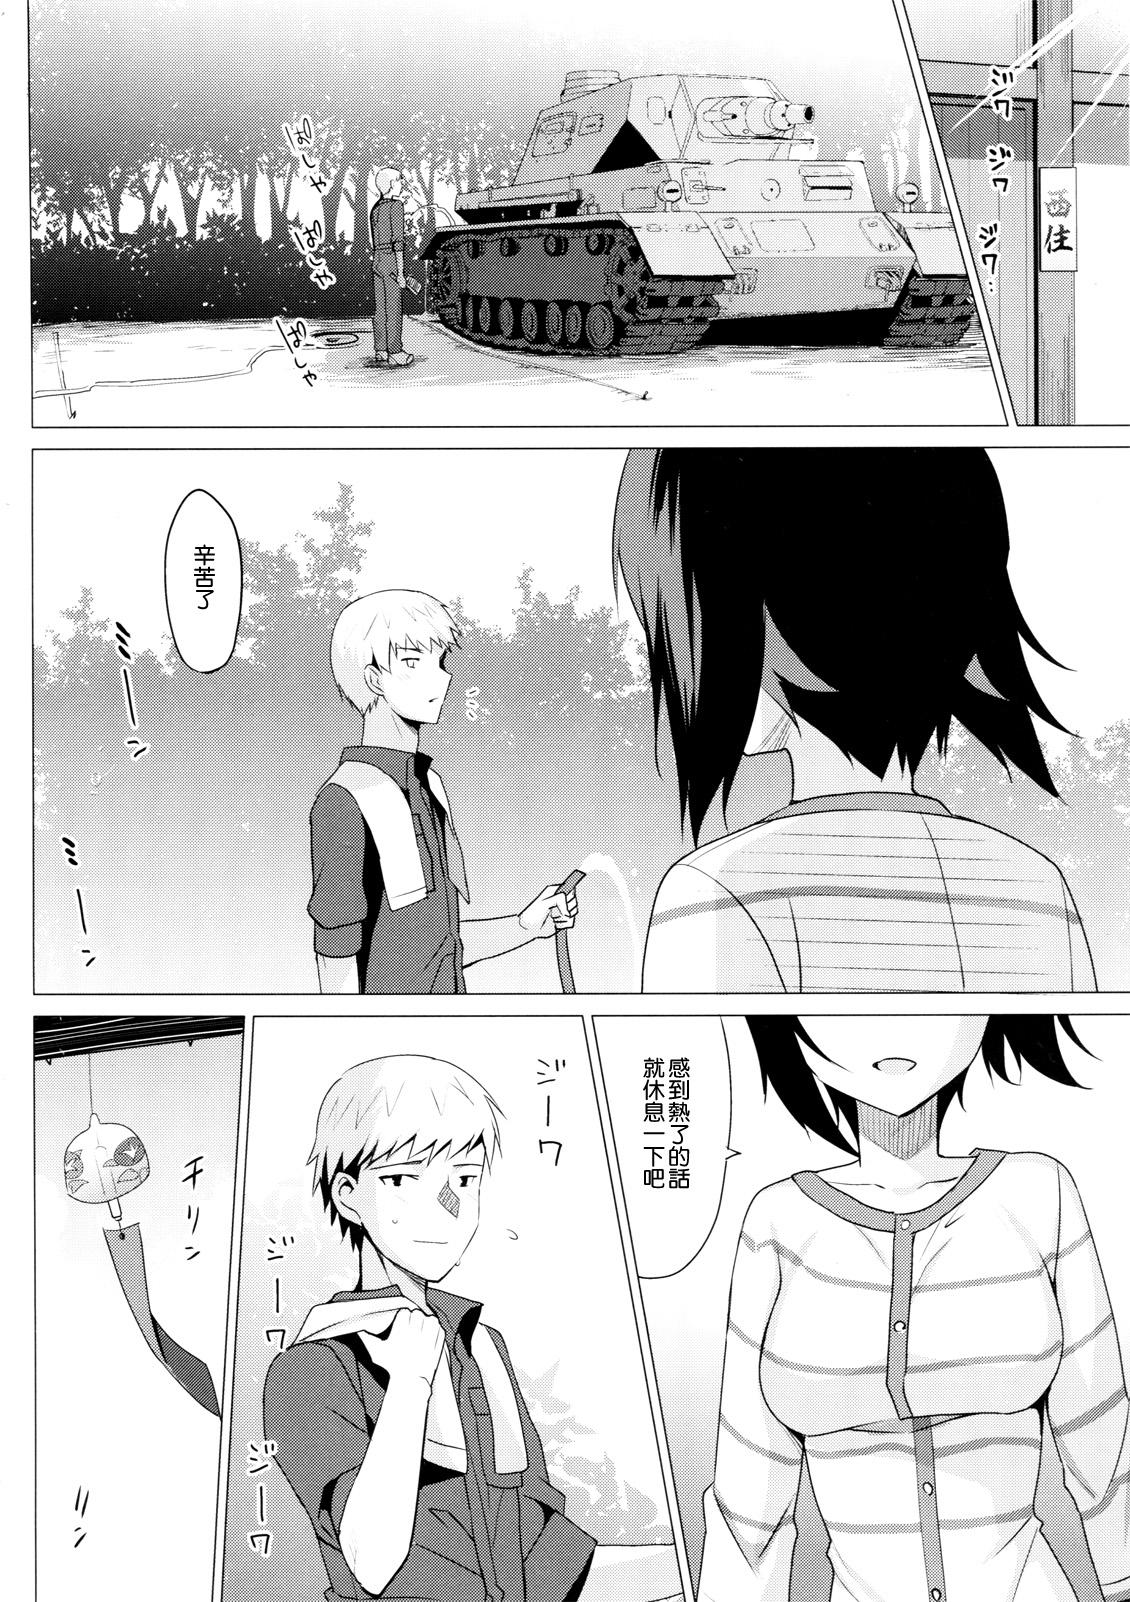 Carro LET ME LOVE YOU - Girls und panzer Fingering - Page 5